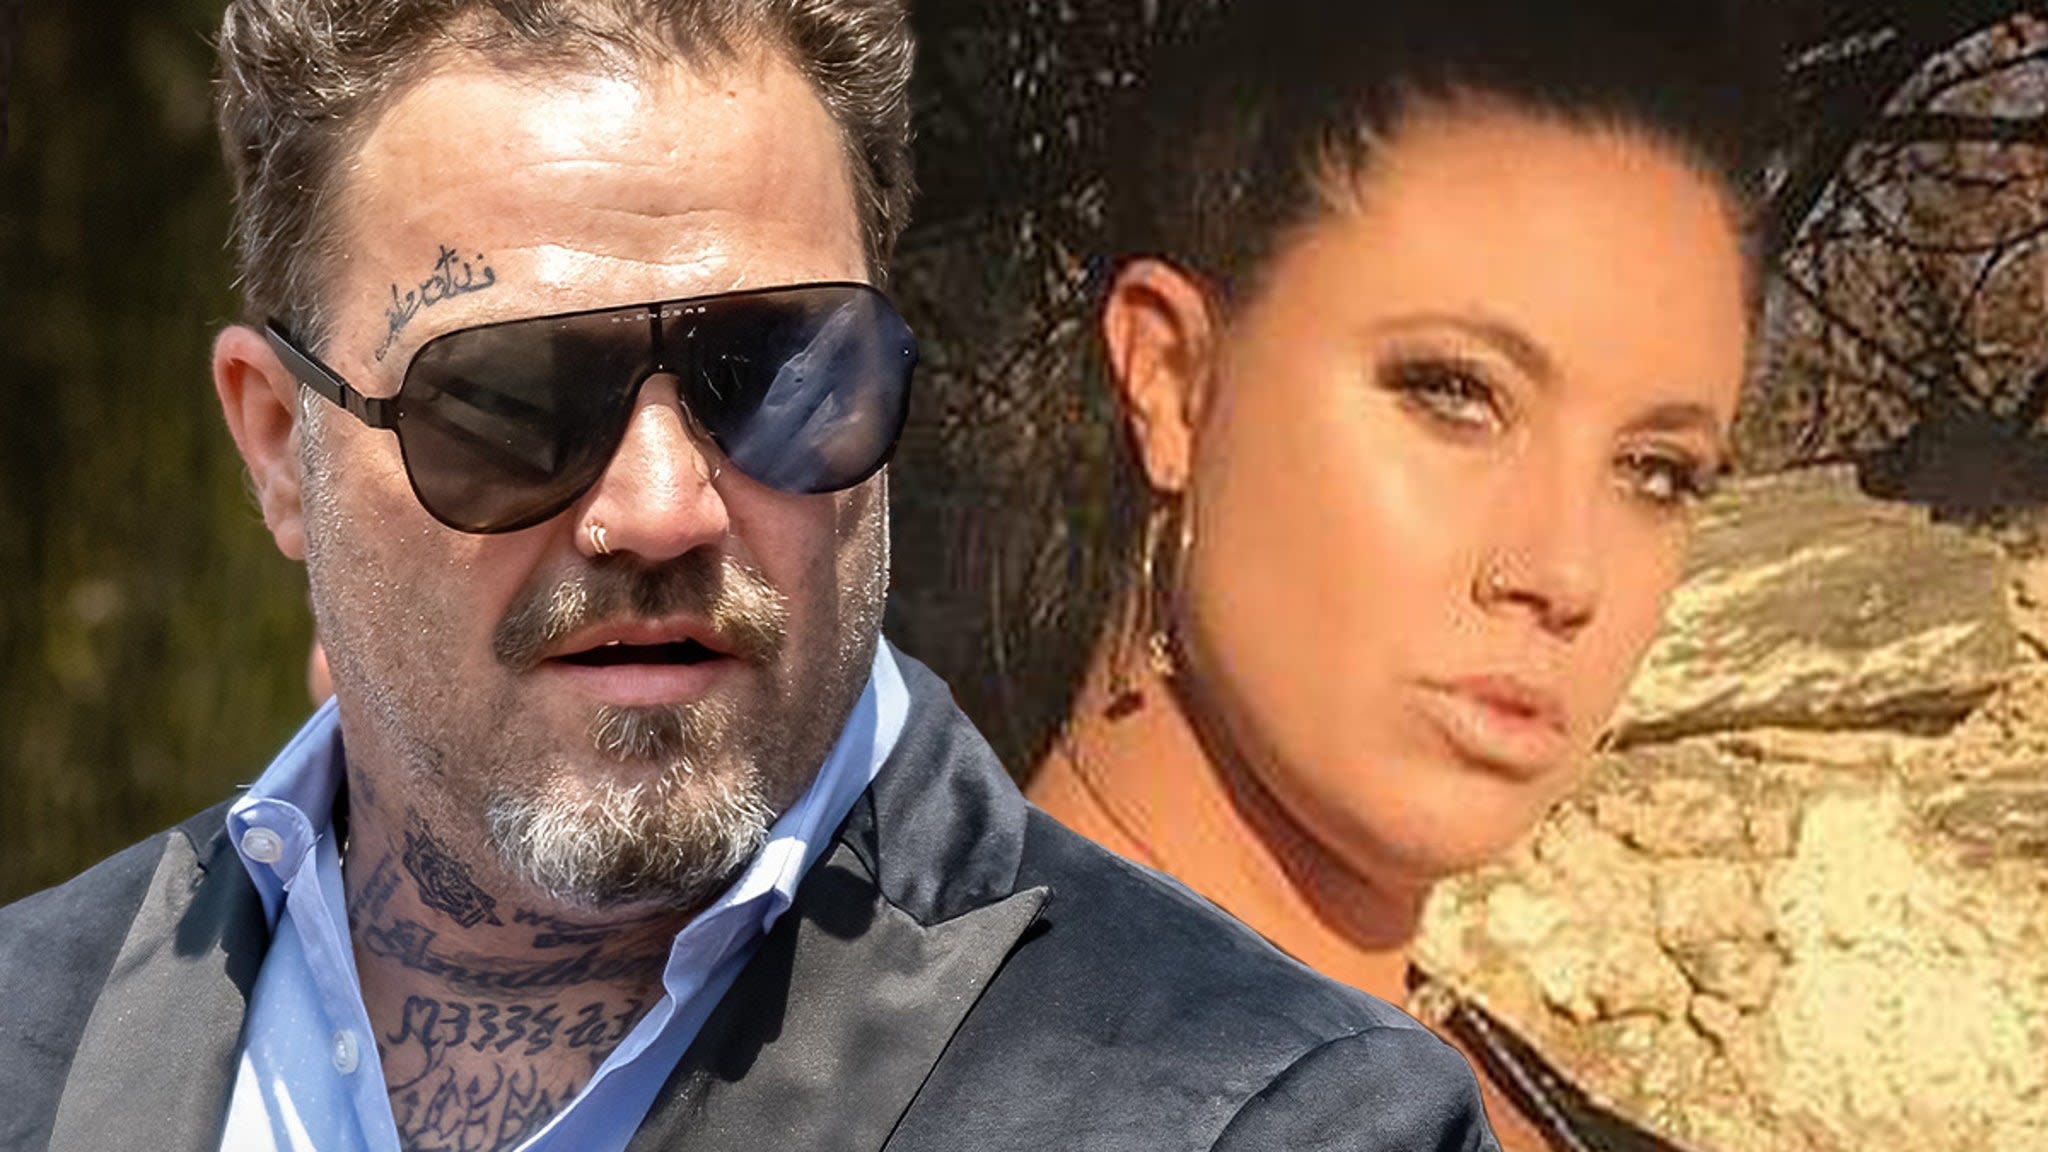 Bam Margera's Ex Was Never His Wife Despite Wedding, Court Tentatively Rules